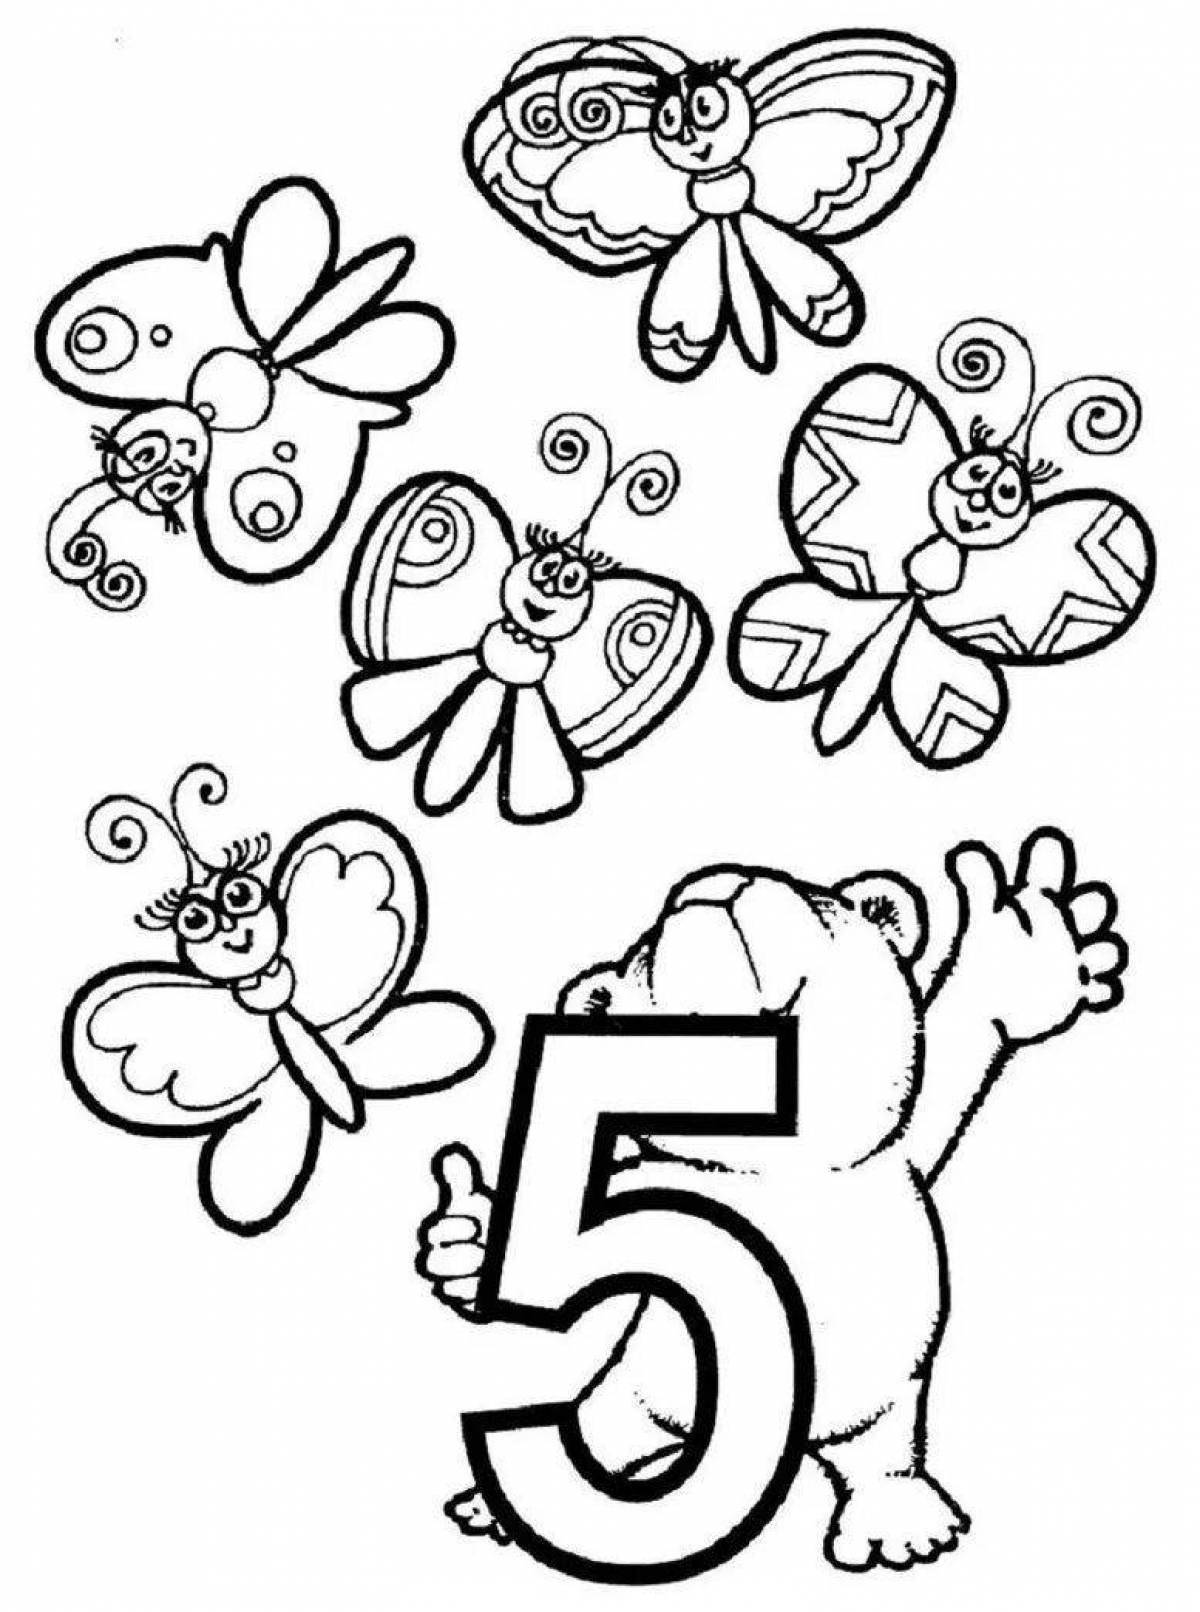 Color-frenzy numbers coloring book for kids